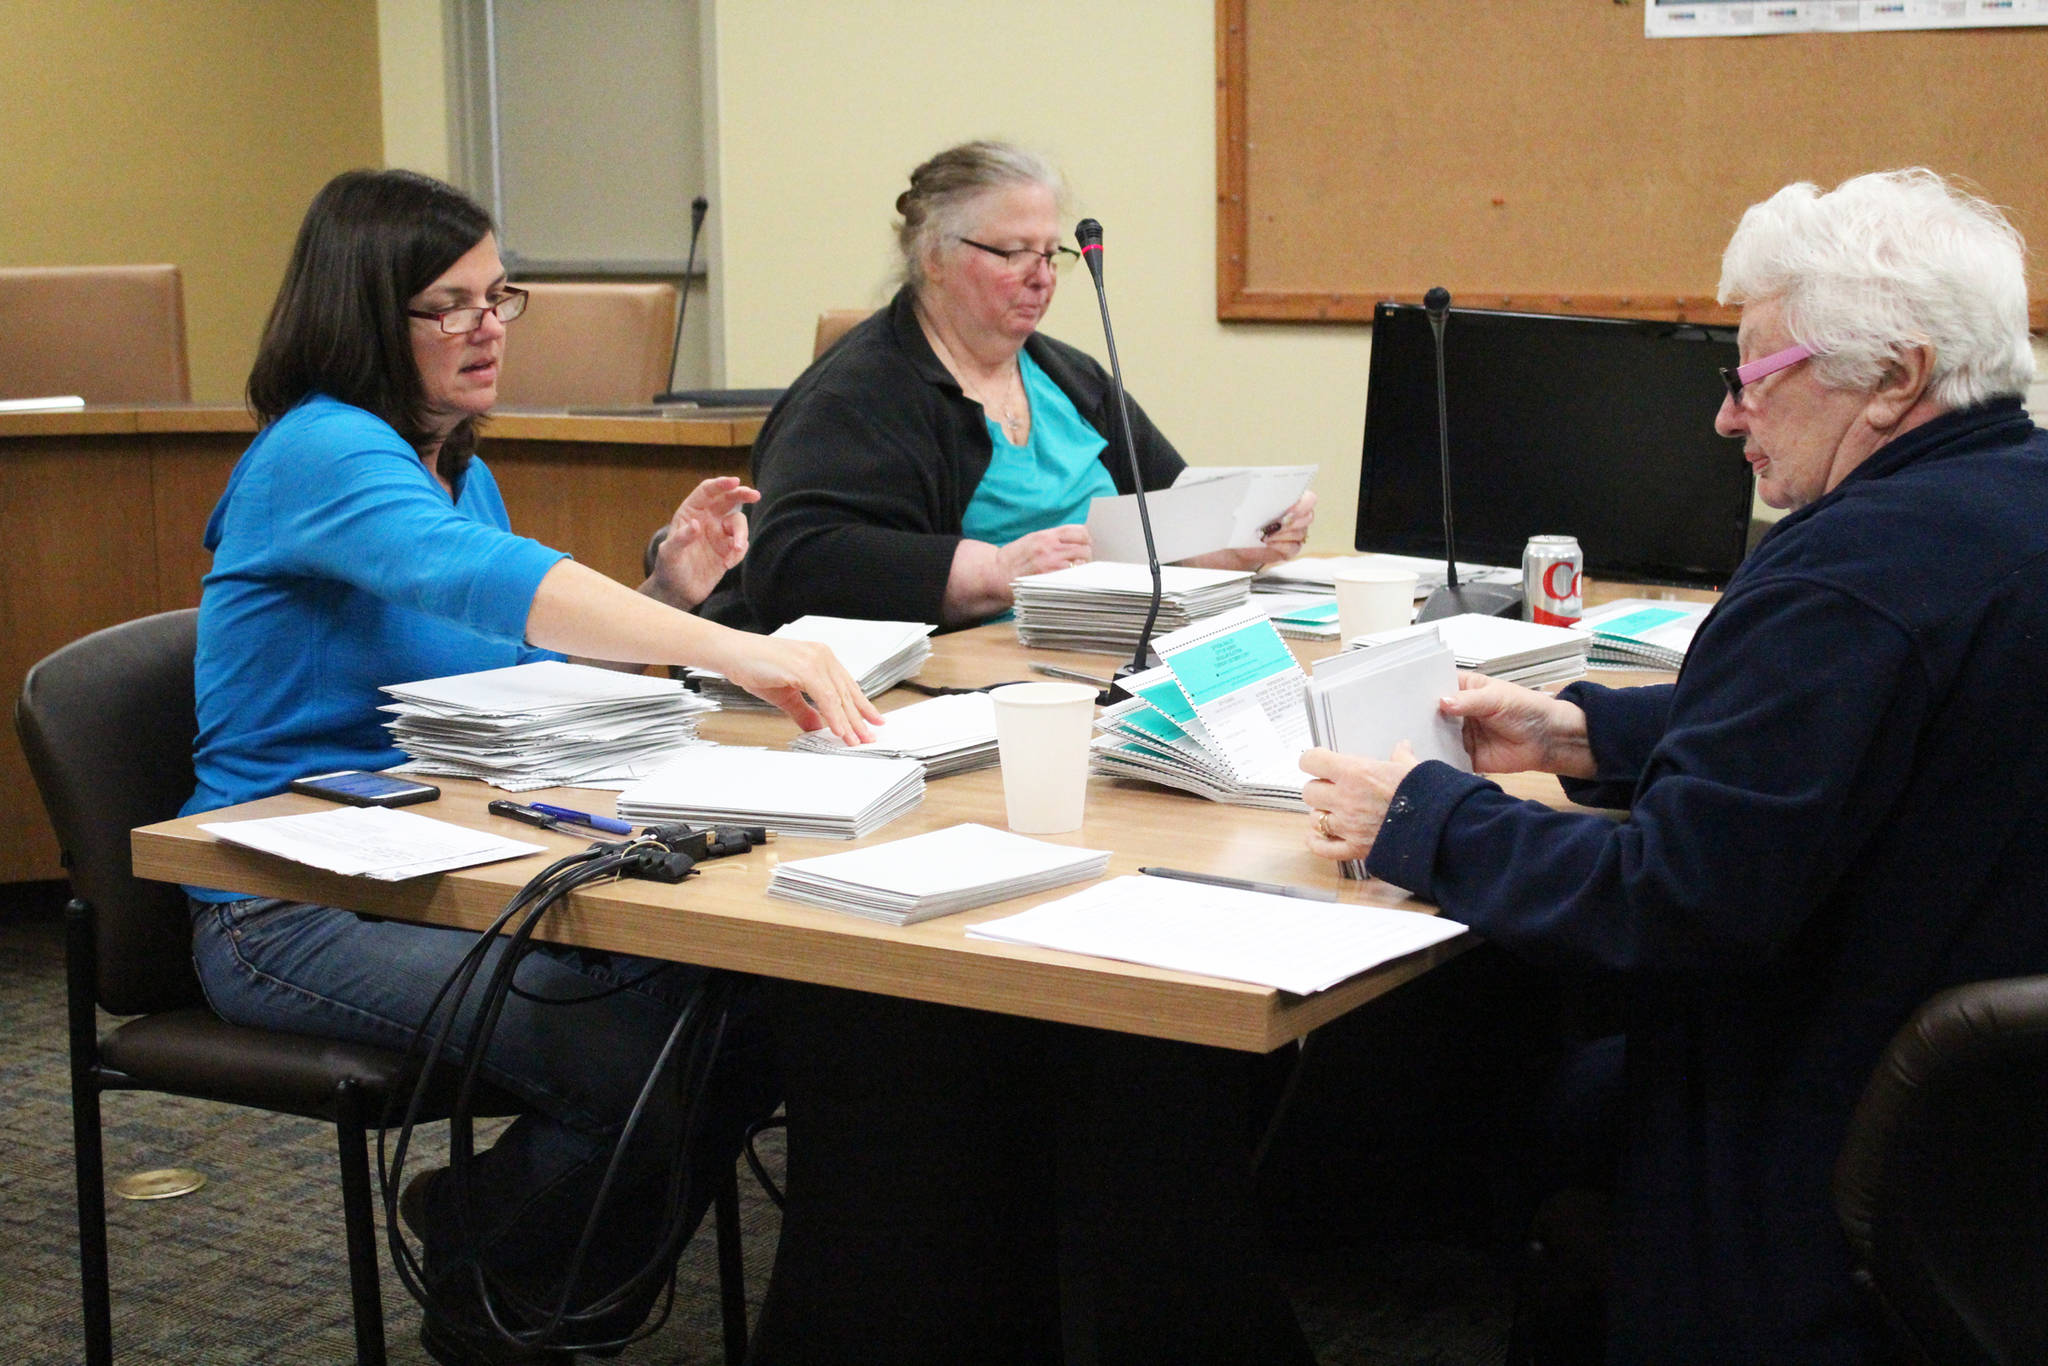 Members of the Homer canvass board work to certify the Oct. 3 election on Friday, Oct. 6, 2017 at Homer City Hall in Homer, Alaska. (Photo by Megan Pacer/Homer News)